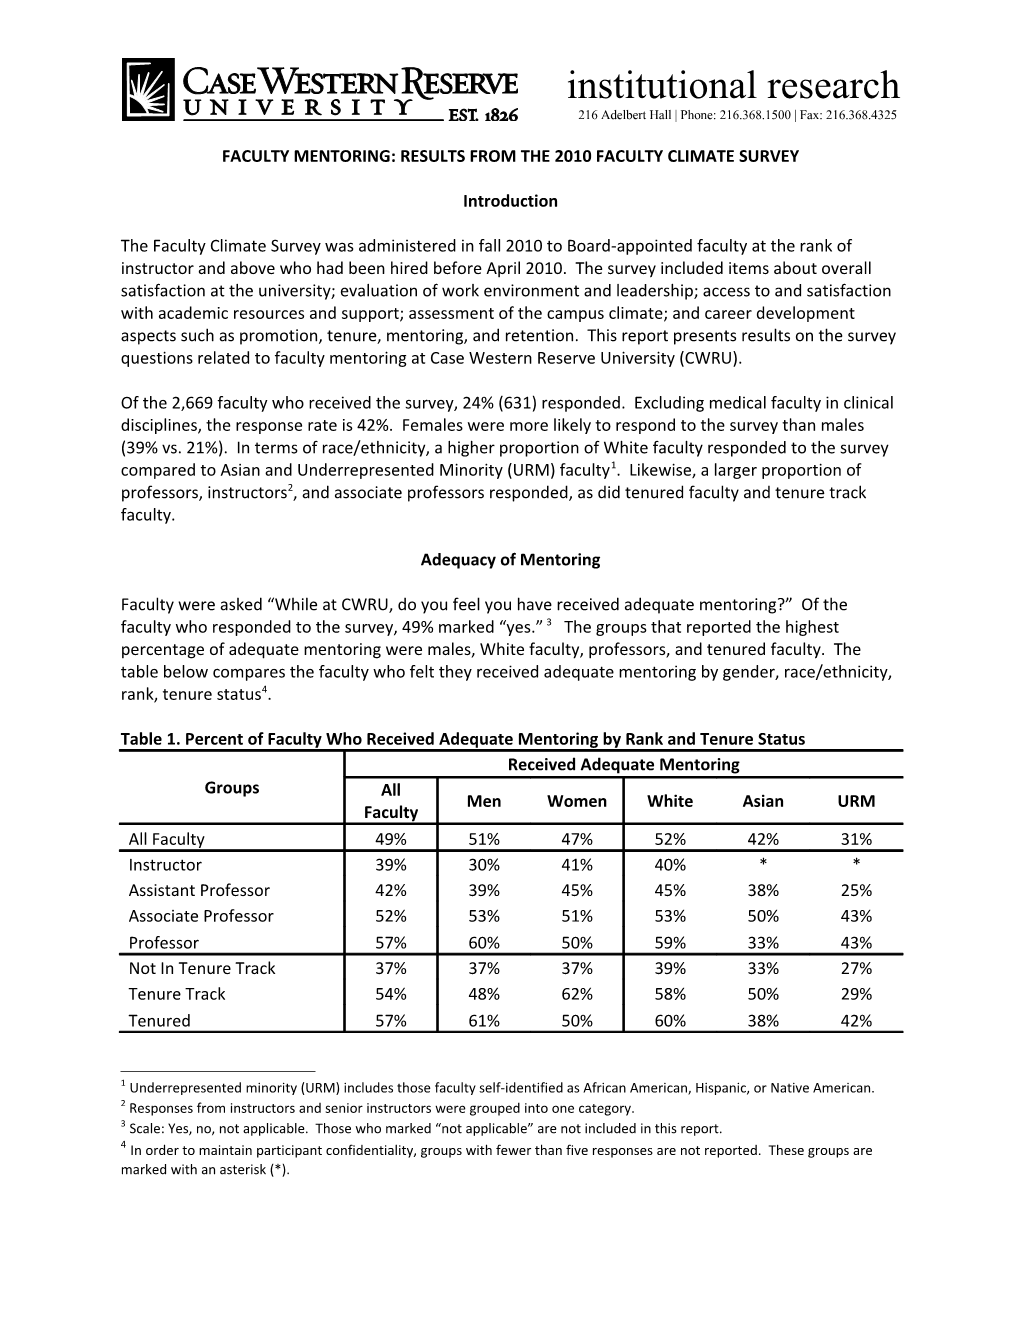 Faculty Mentoring: Results from the 2010 Faculty Climate Survey